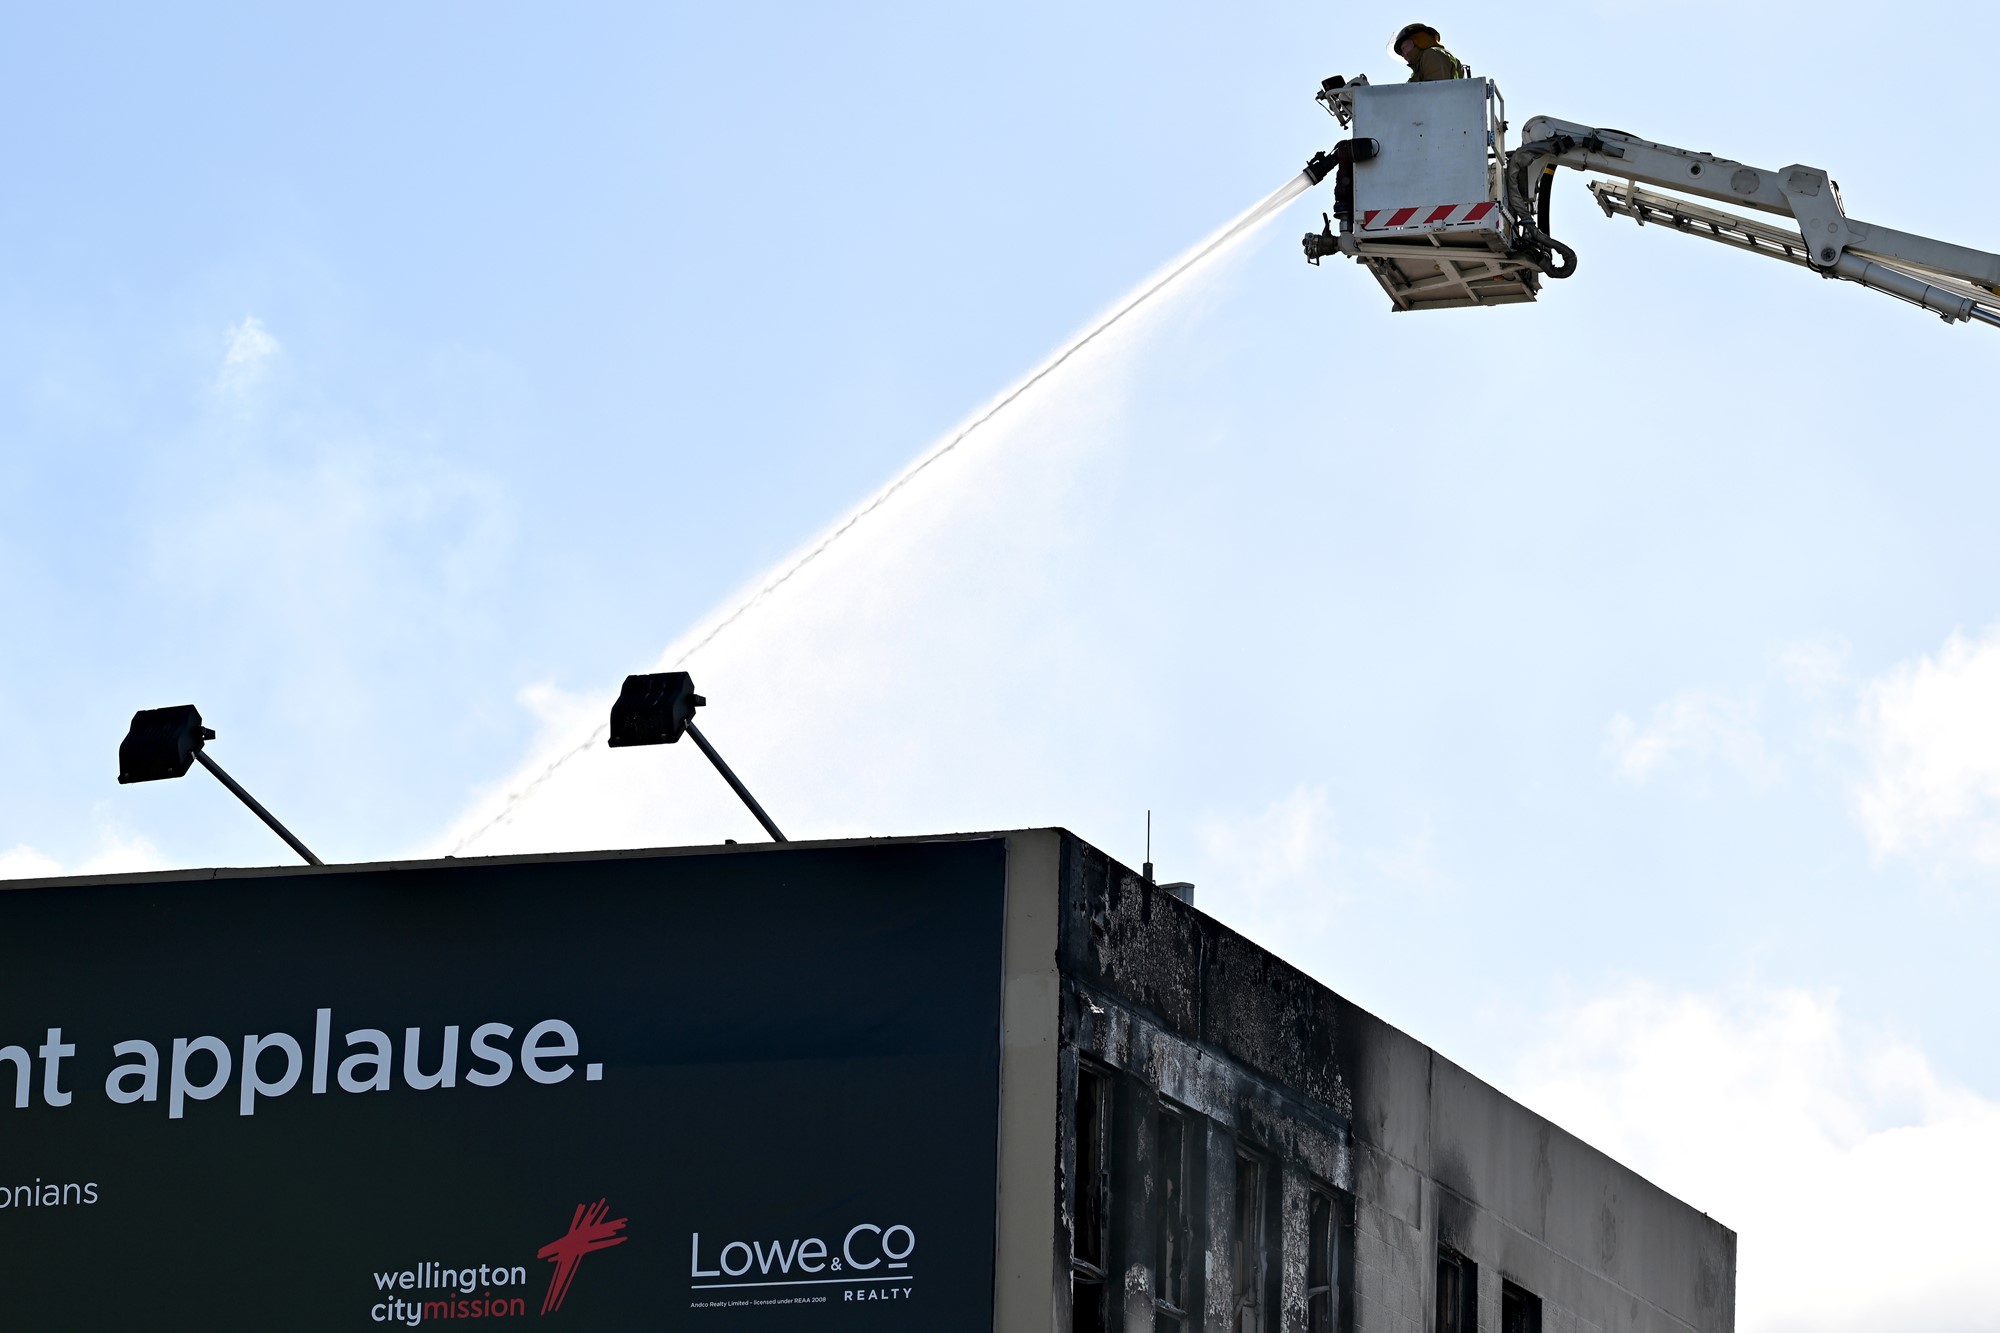 A firefighter in a cherry picker holds a hose.